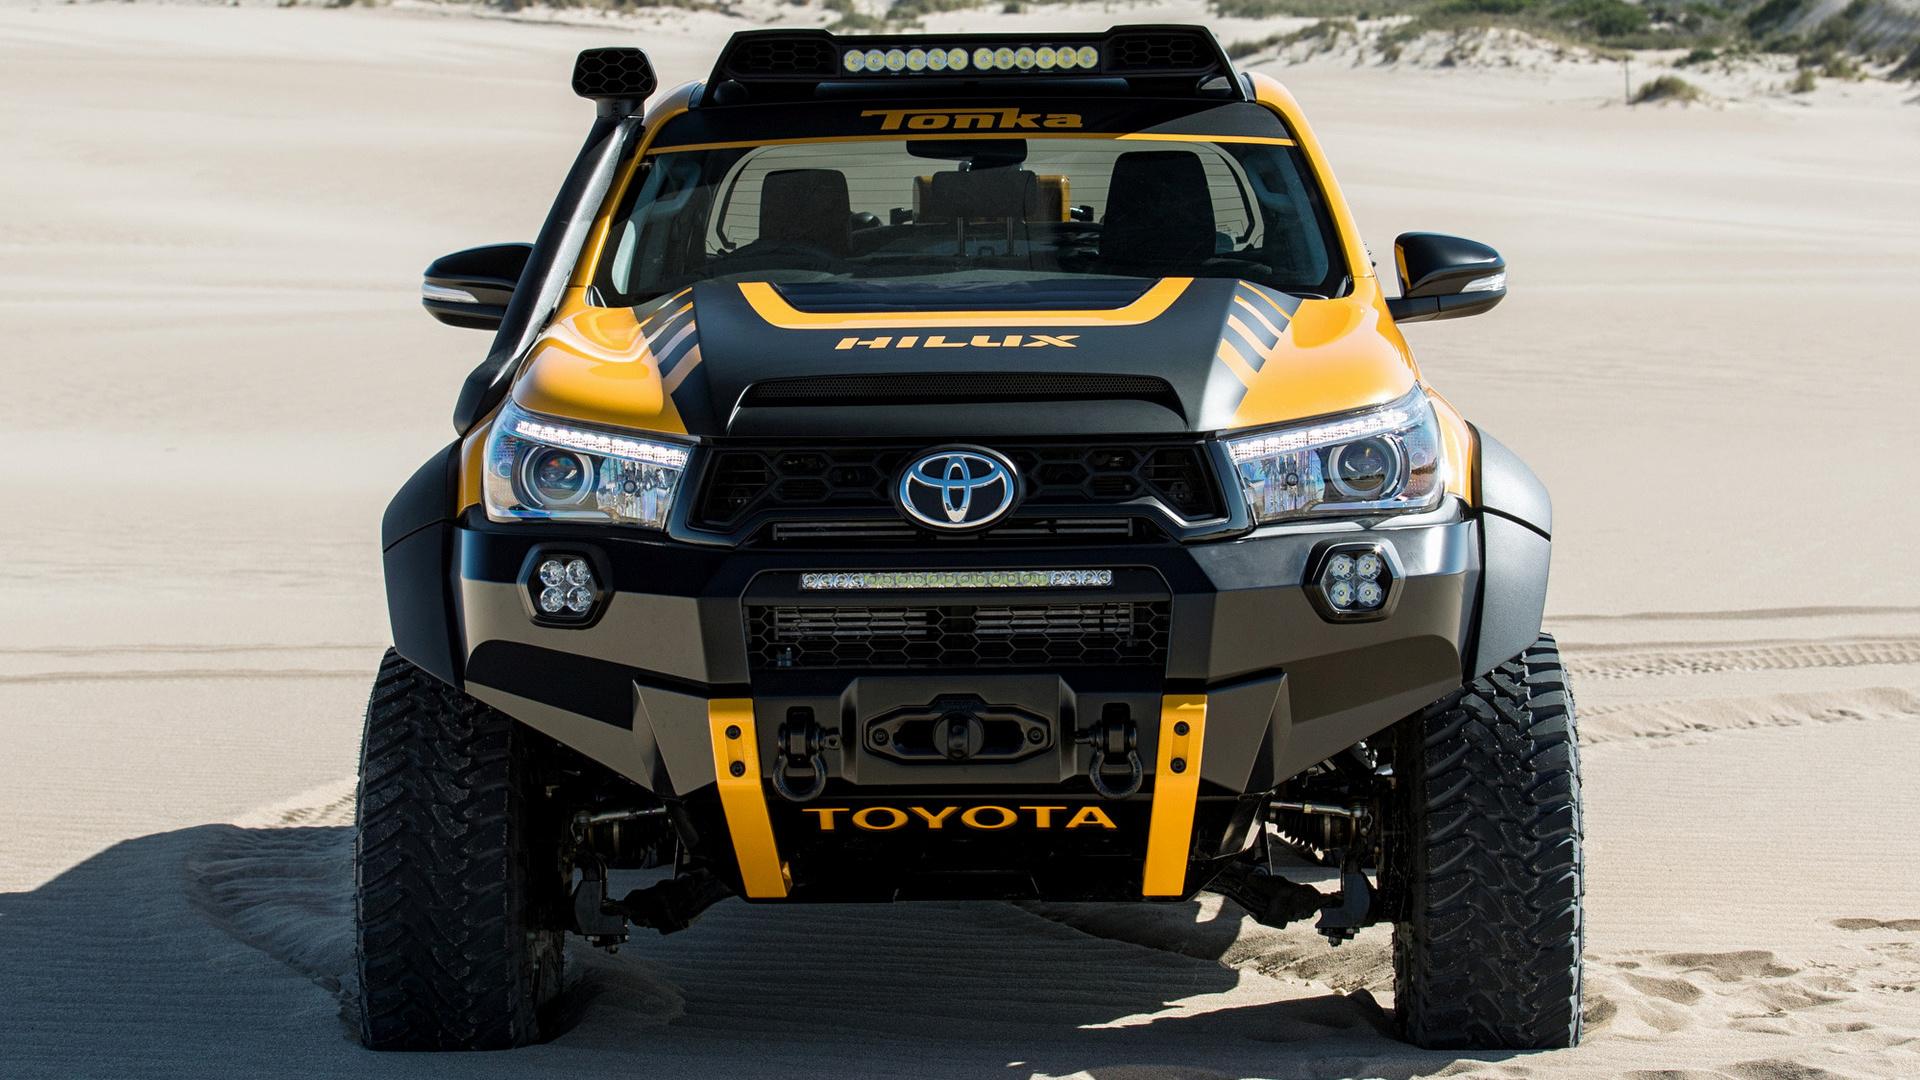 Toyota Hilux Tonka Concept and HD Image